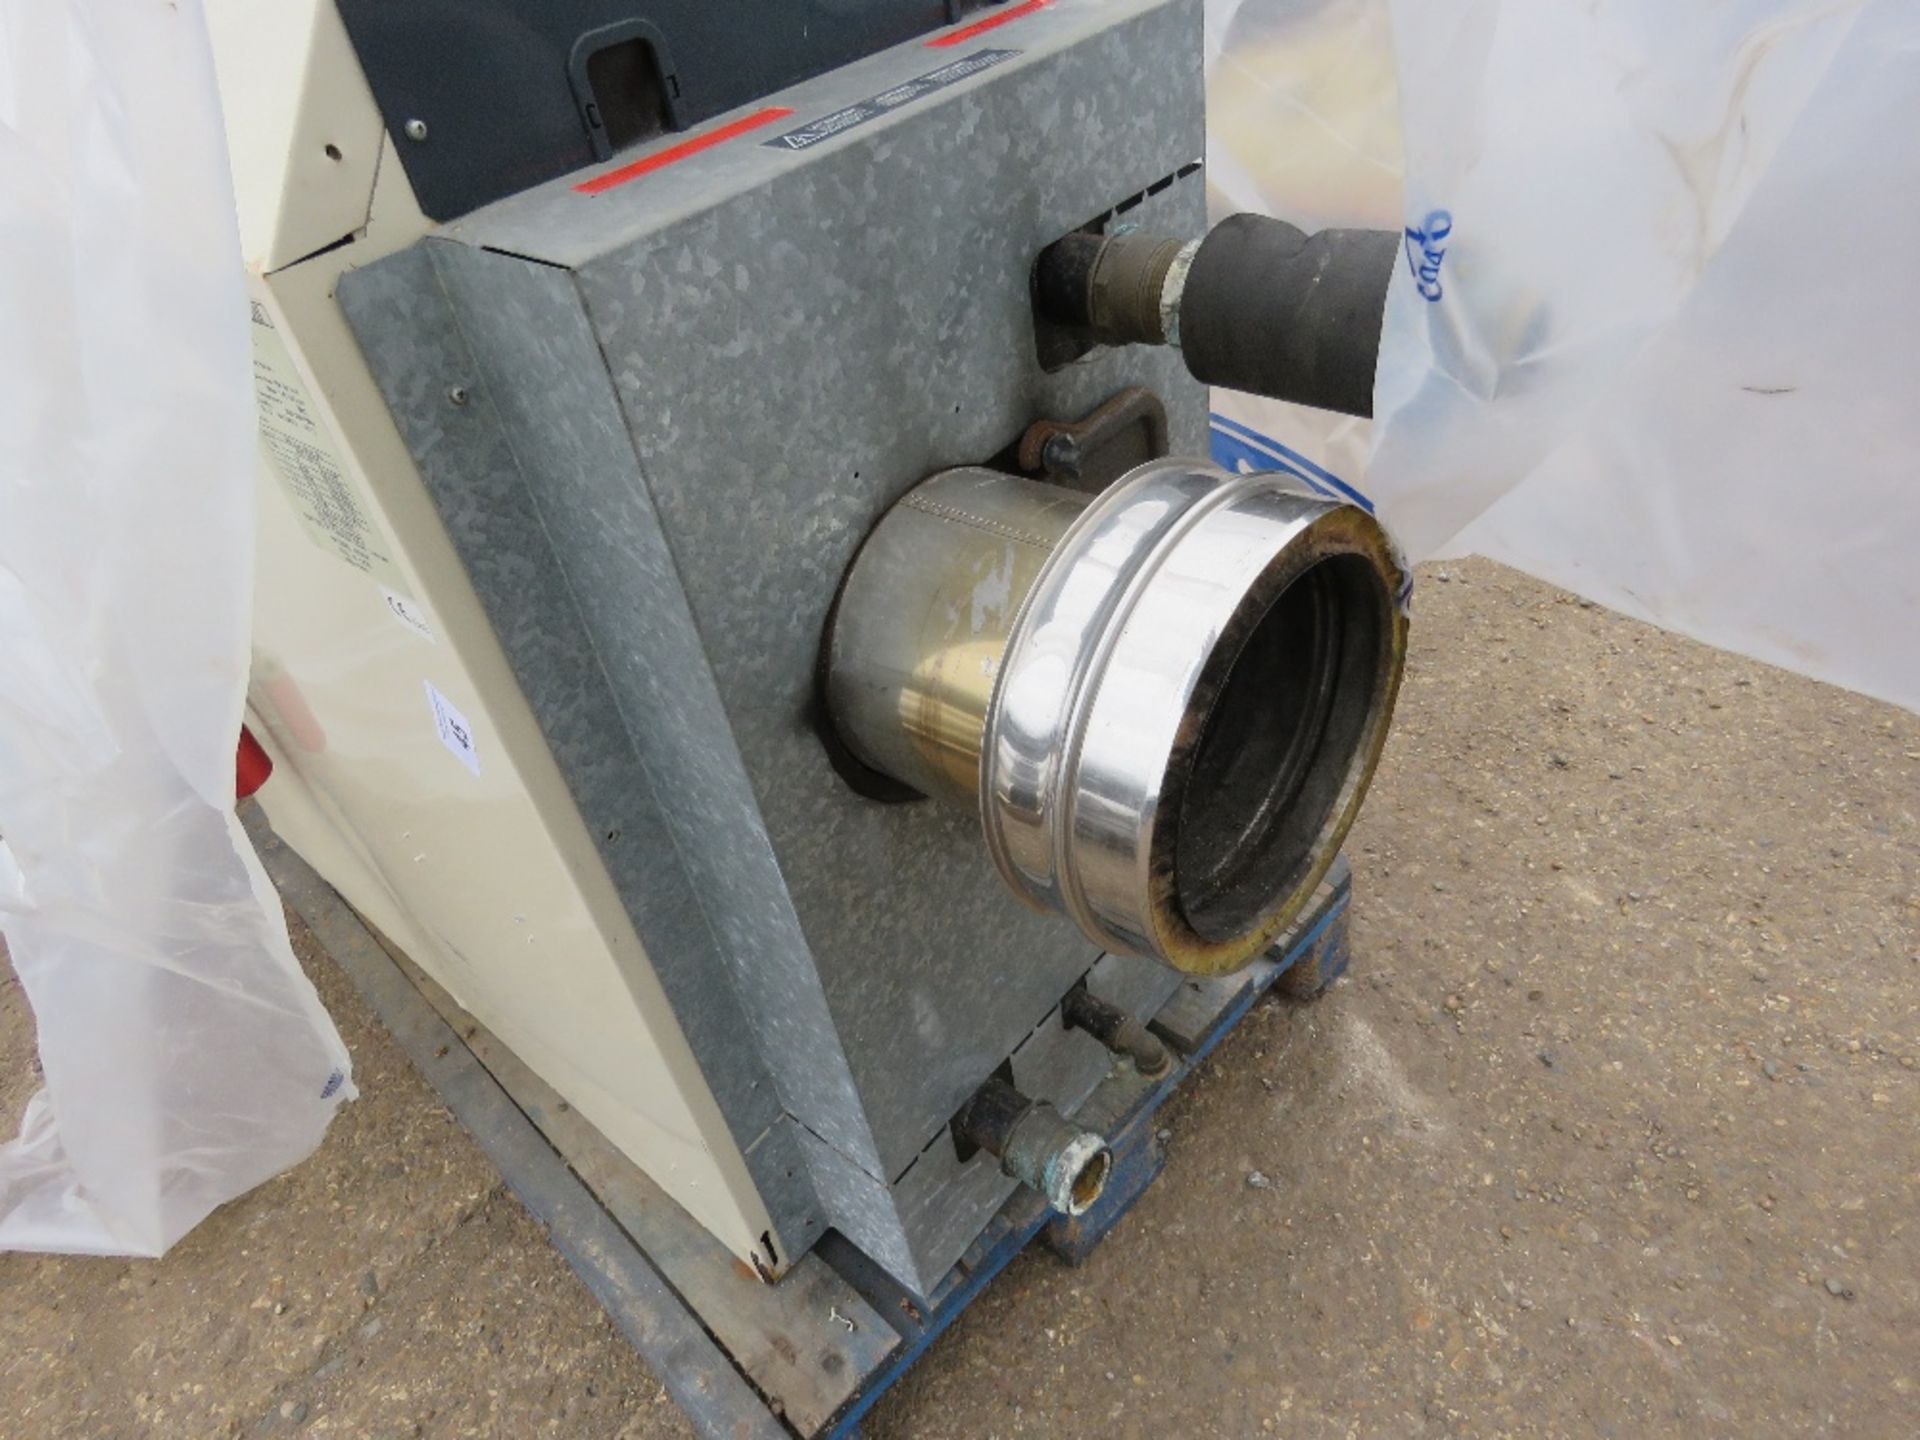 IDEAL FALCON GTE GT210 HEATER WITH CHIMNEY SECTIONS, PREVIOUSLY USED ON LIQUID FUEL. SOURCED FROM MU - Image 4 of 6